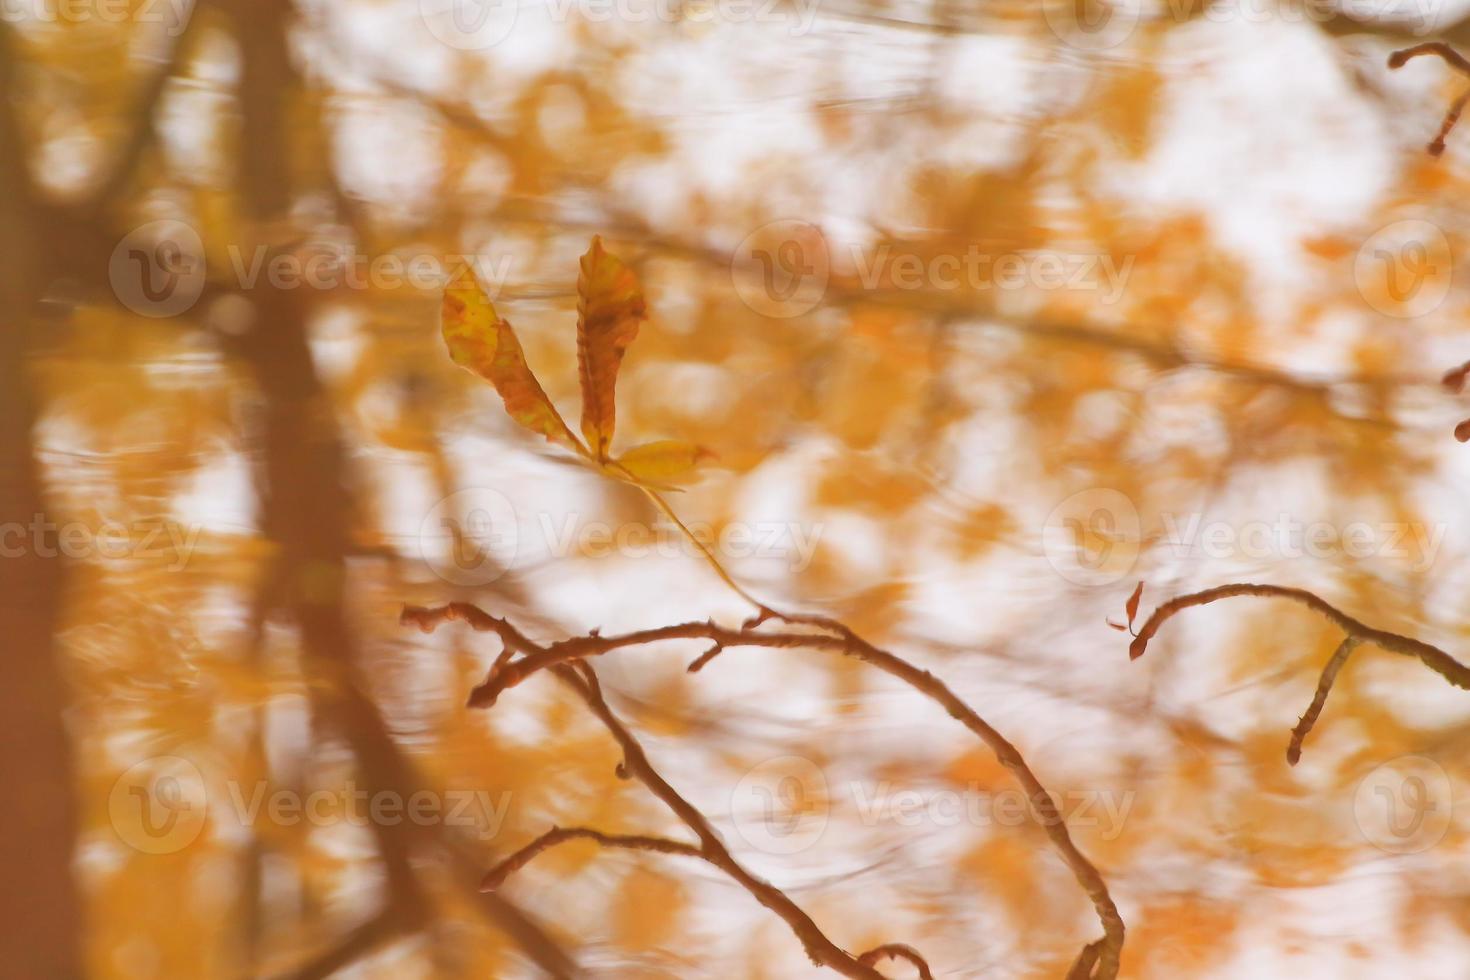 abstract image of autumn branches and leaves reflected in a pond photo